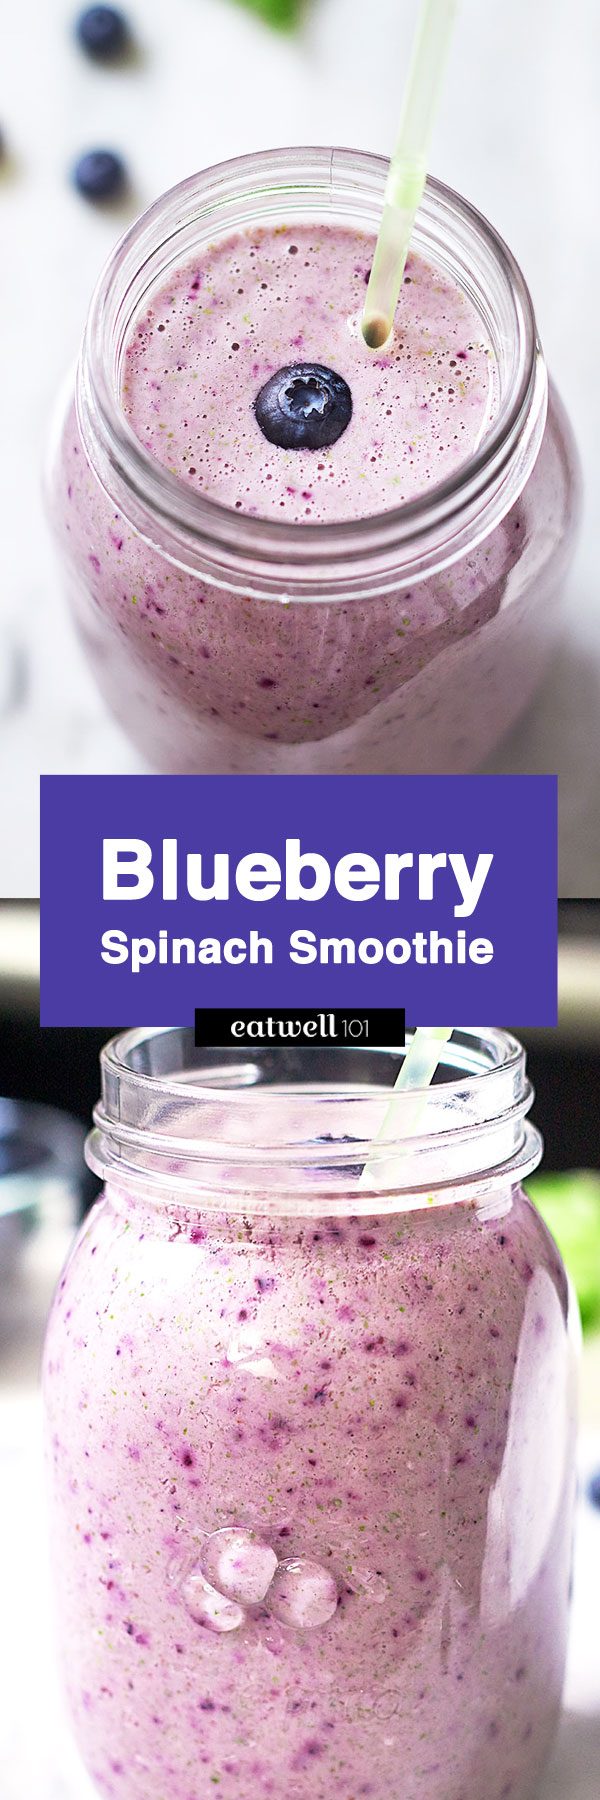 Blueberry -Spinach Smoothie Recipe — Eatwell101